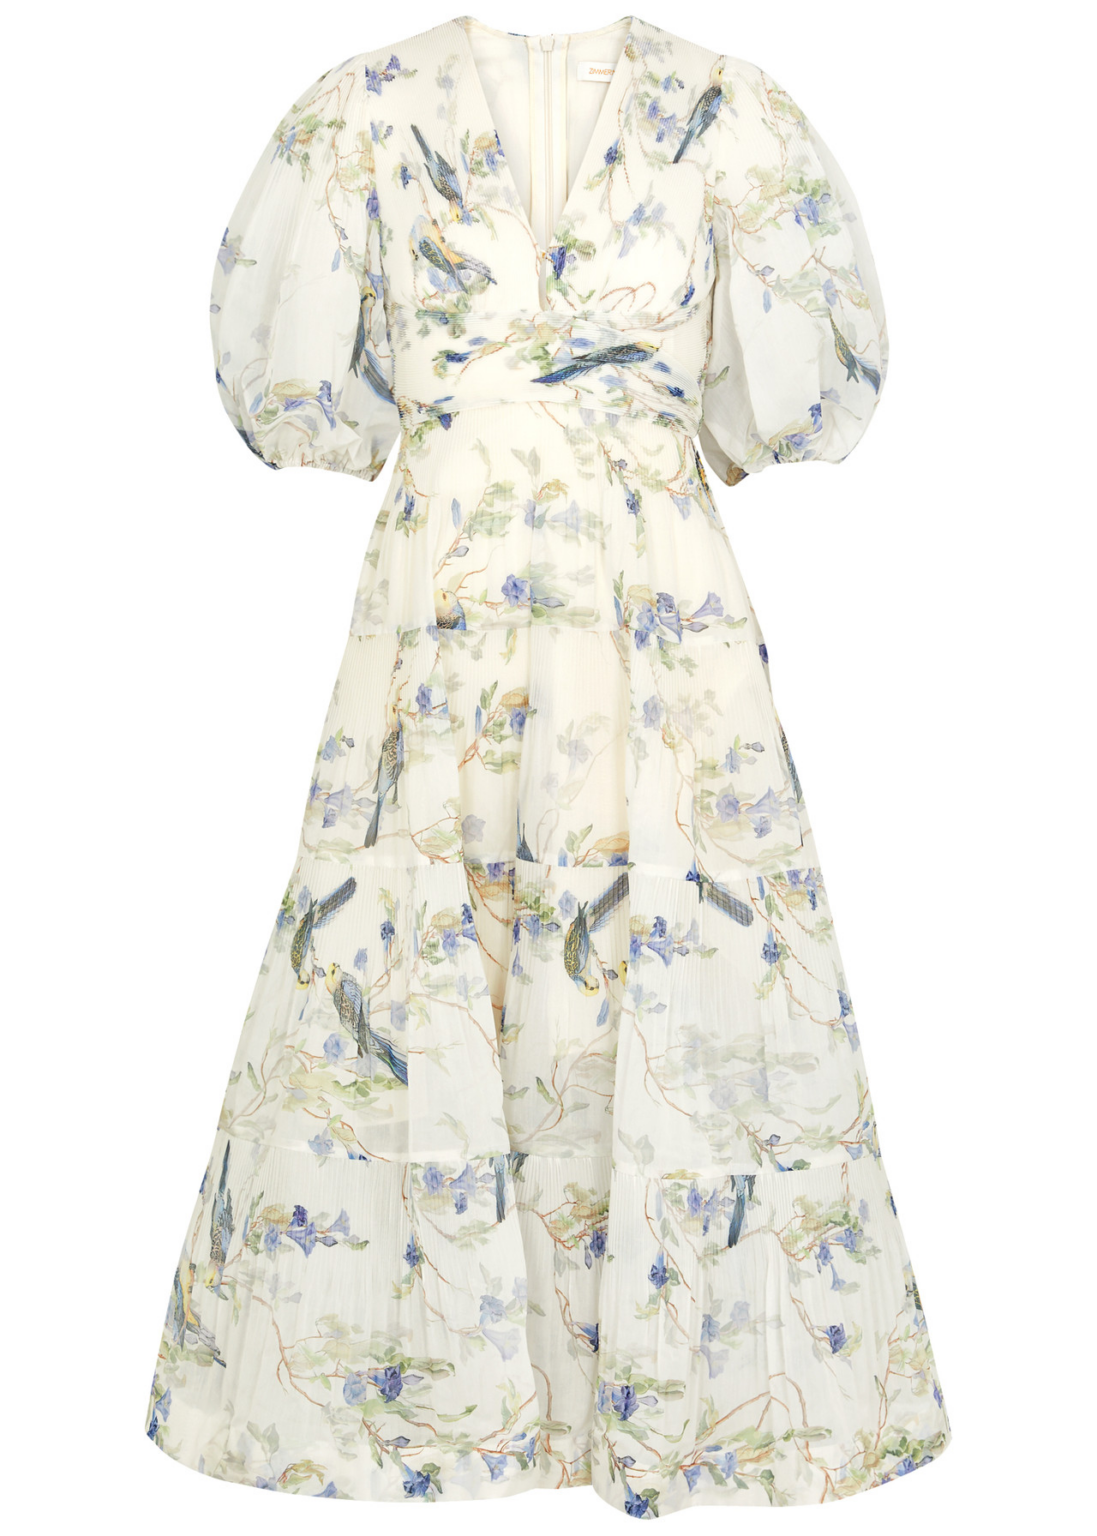 Our Favourite Wedding Guest Dresses For Spring - The Wedding Edition